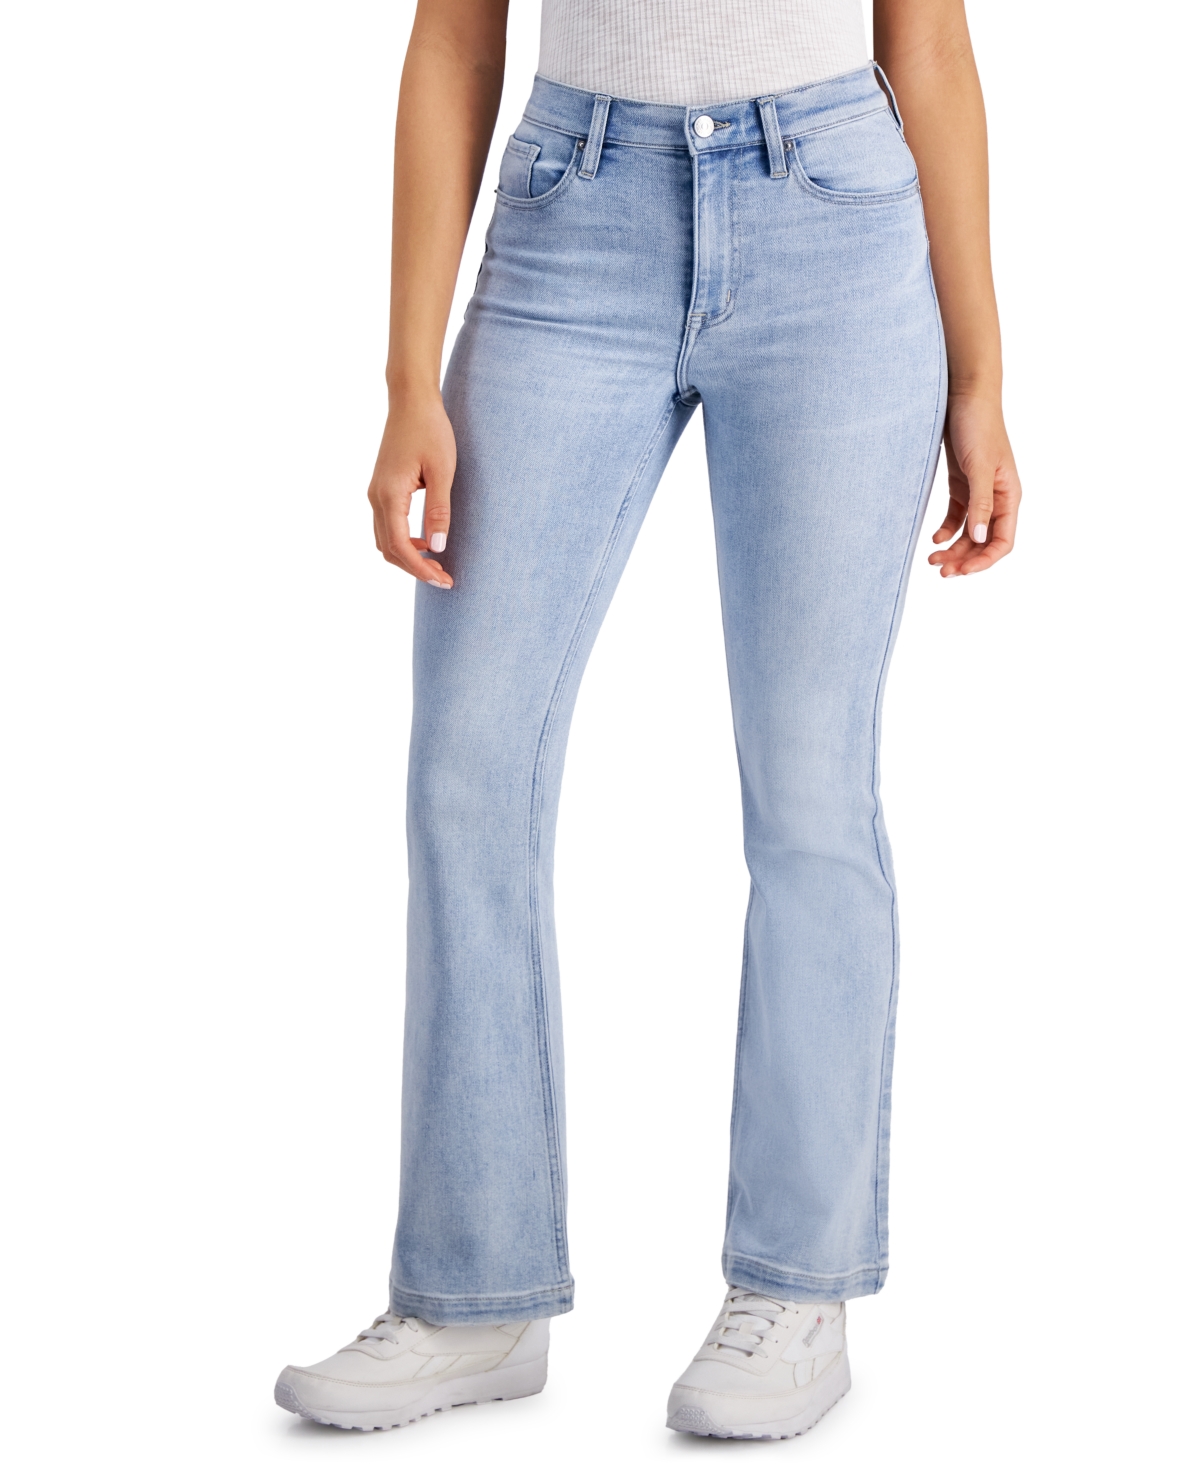 Women's High-Rise Flare Jeans - Sy - Skyline